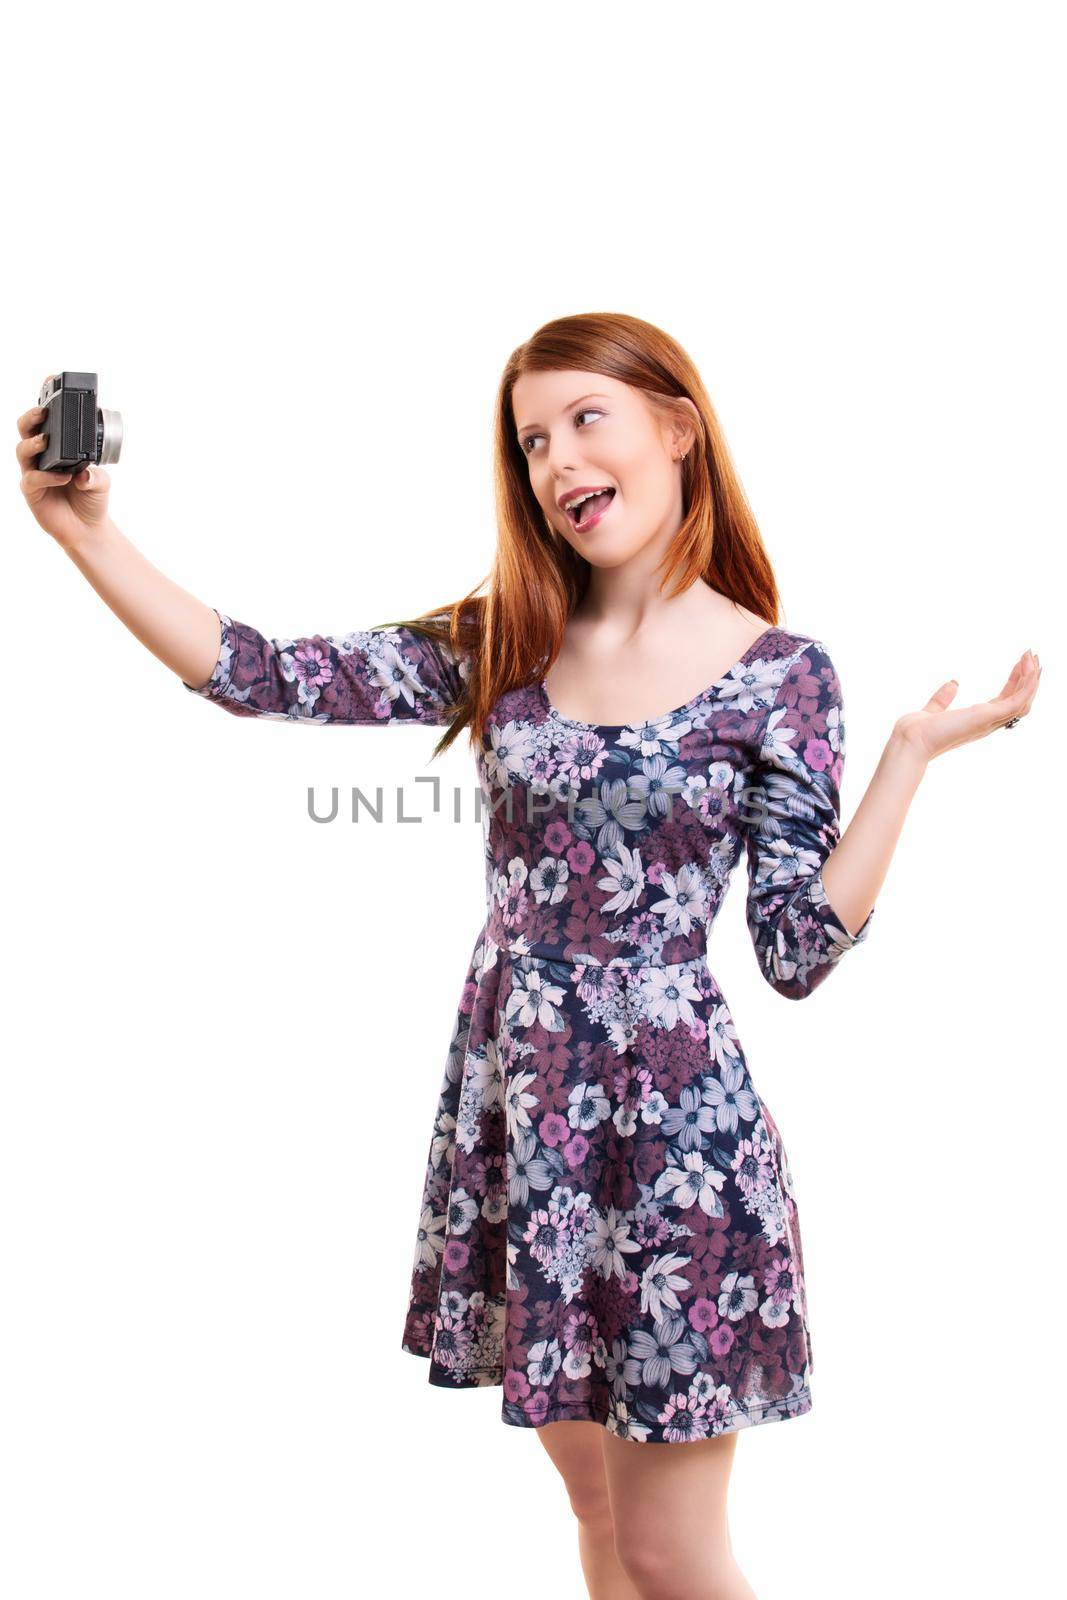 Beautiful young woman in a flowery dress taking a selfie or filming her self, isolated on white background. Attractive redhead girl with long hair vlogging. Lifestyle, happiness, and social concept.